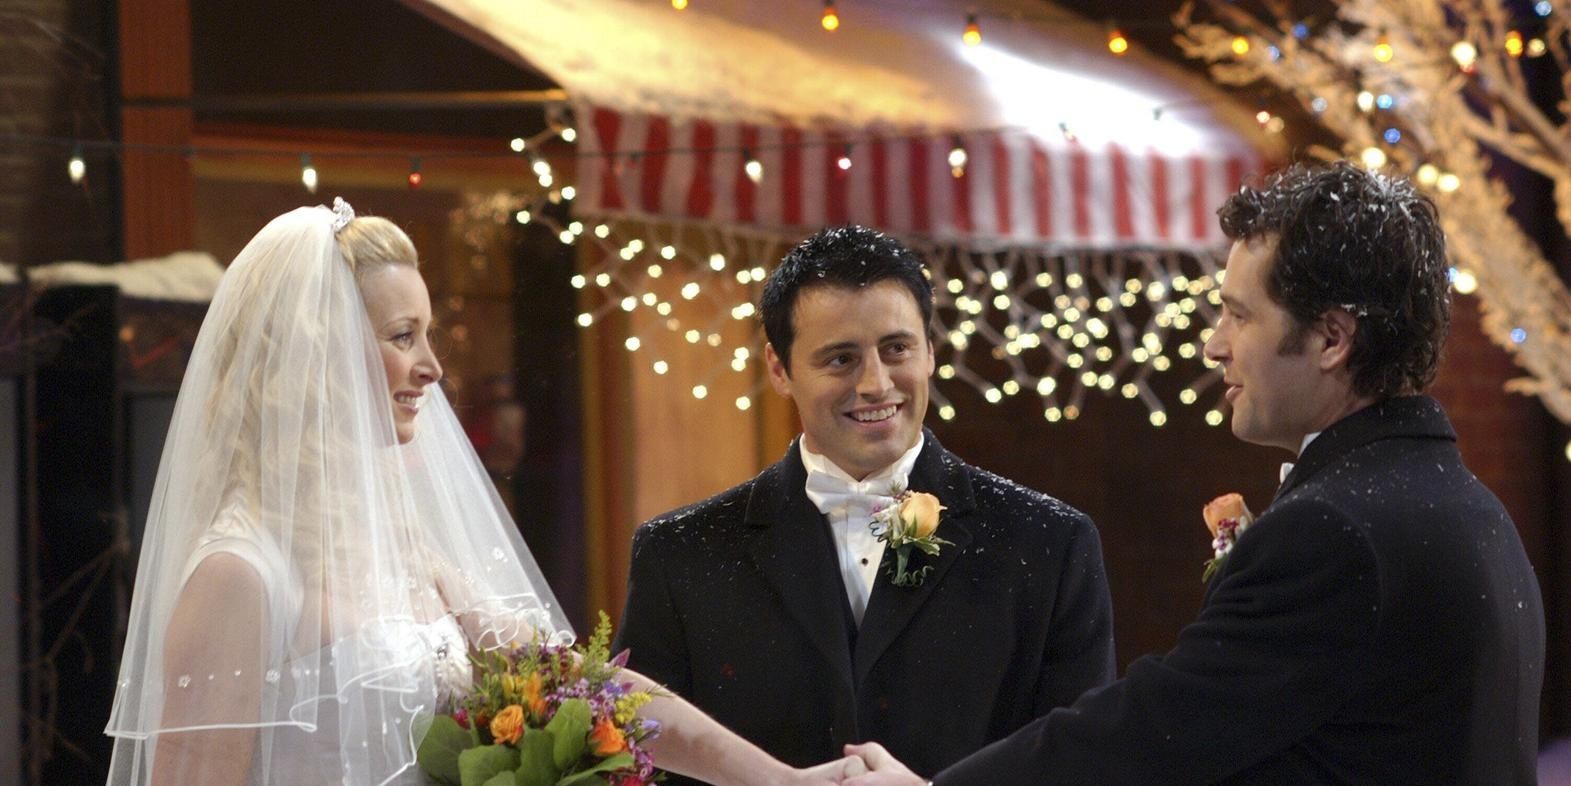 Joey officiates Phoebe and Mike's wedding